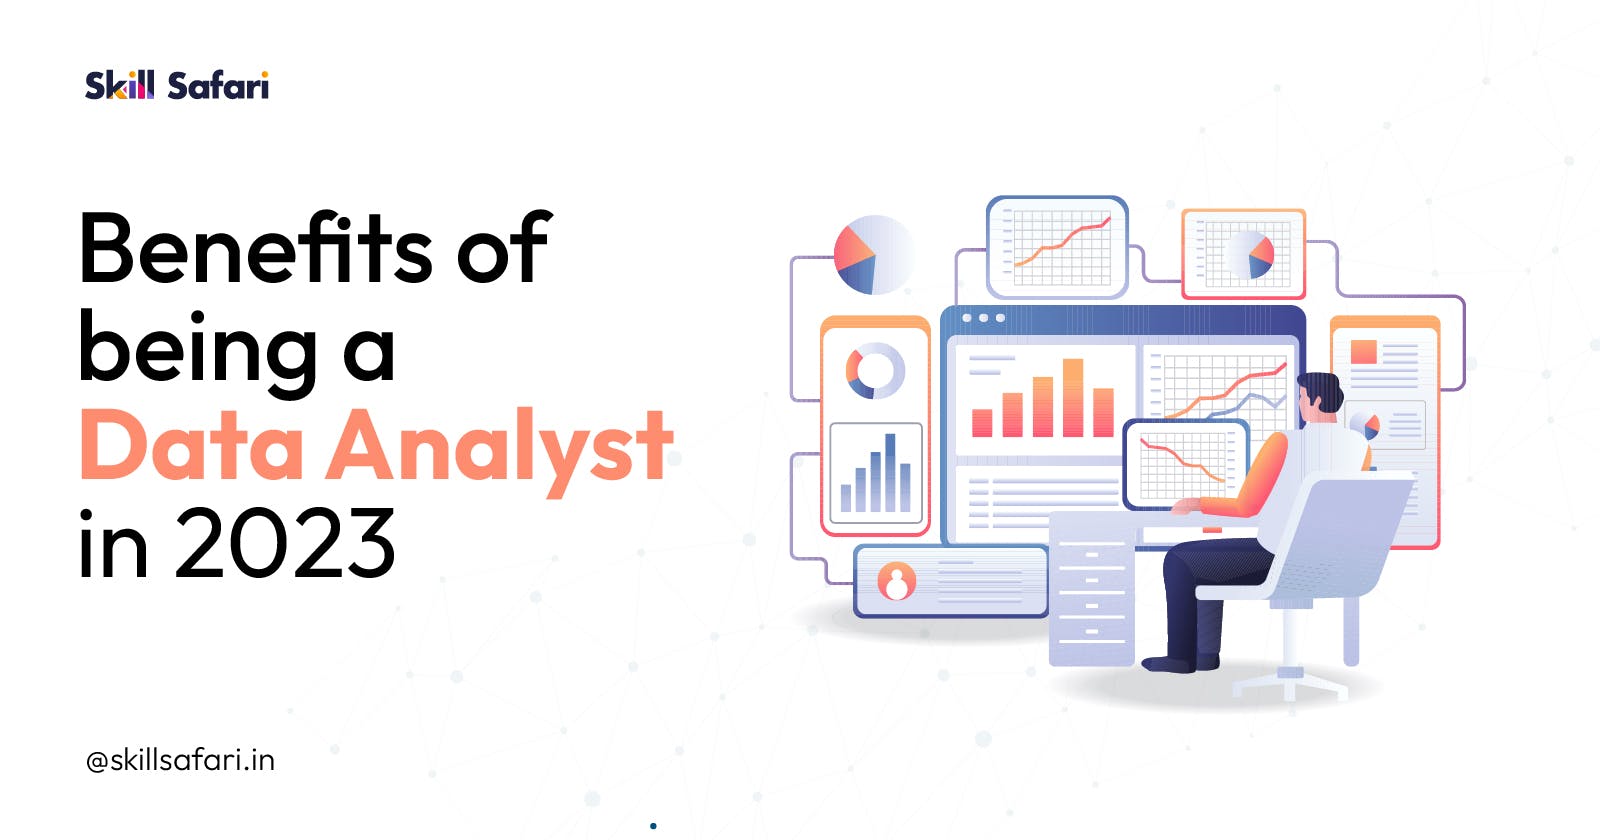 Benefits of being a Data Analyst in 2023